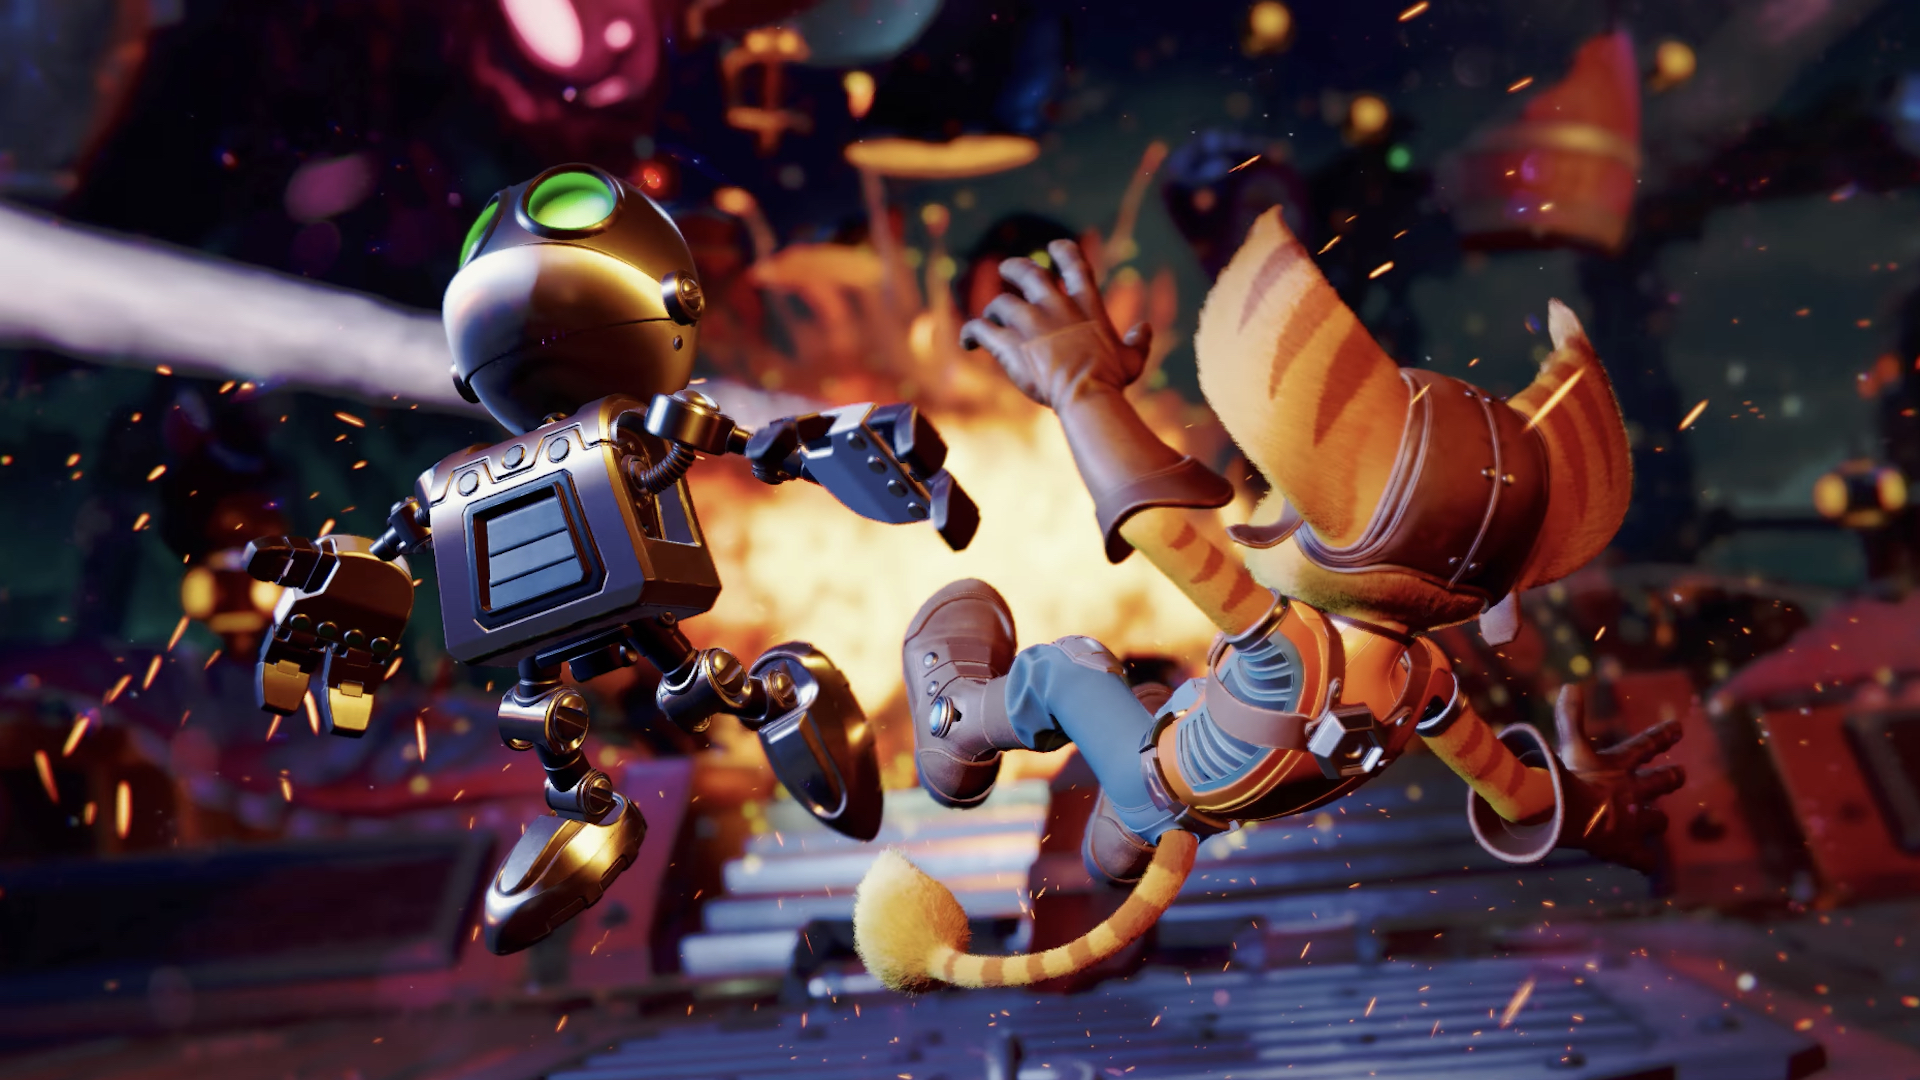 ratchet and clank a rift apart